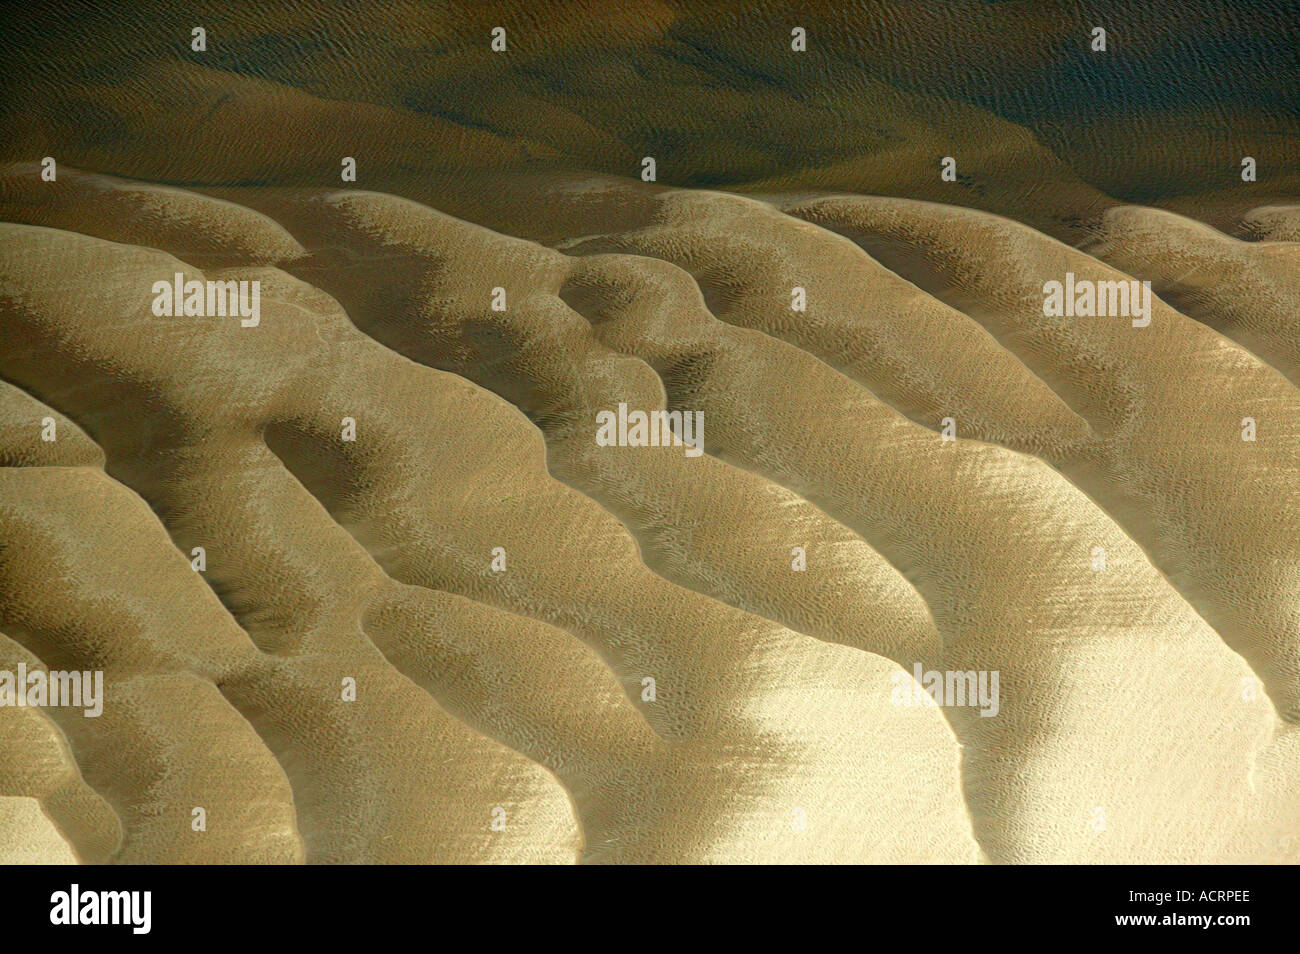 Aerial photo of sand formations on the riverbed of Glomma, Hedmark fylke, Norway Stock Photo